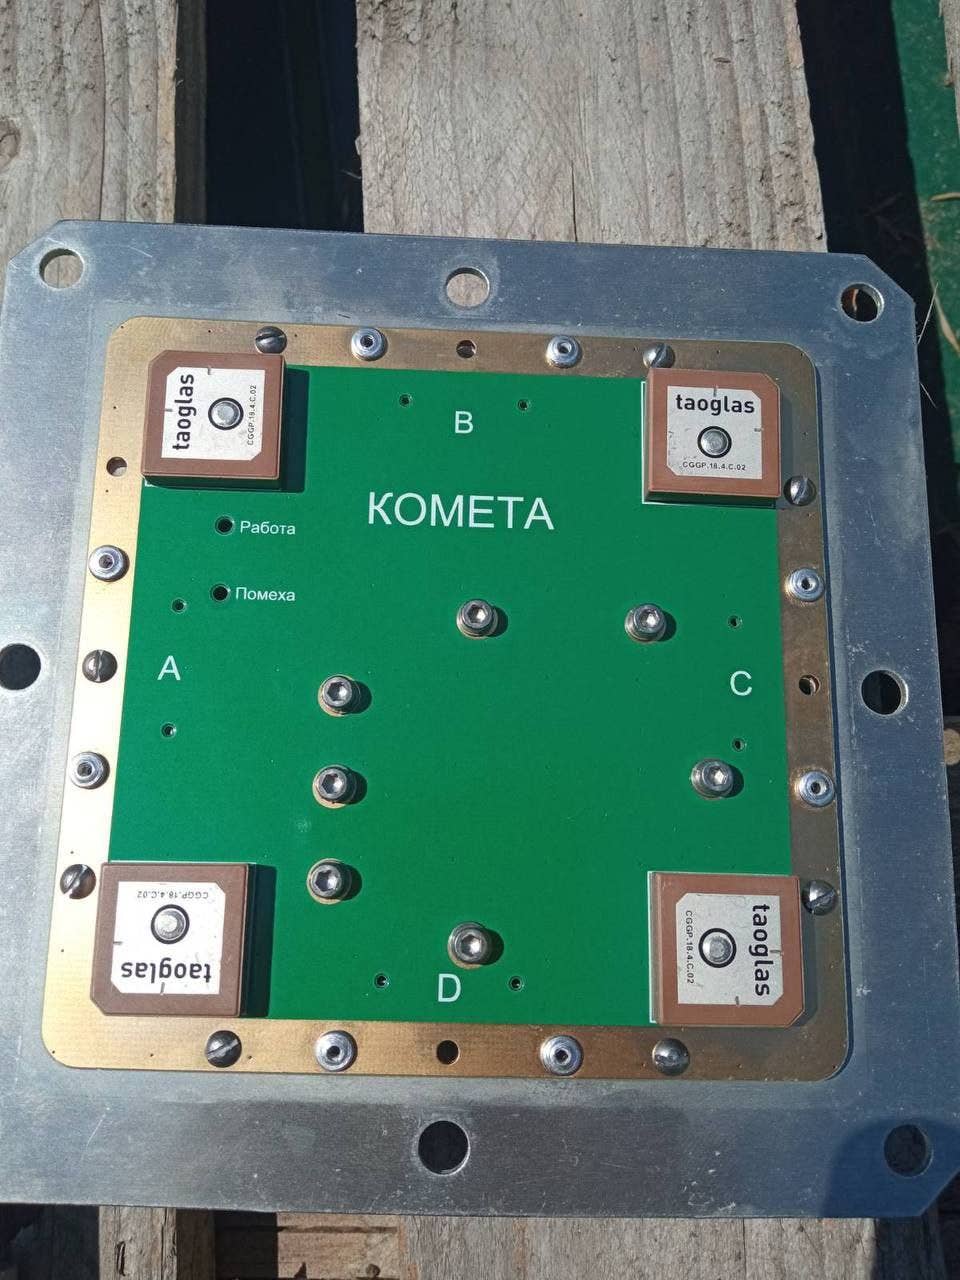 Various views of the Kometa-M antenna and related internal components from the guidance system. <em>Milinfolive Telegram channel</em>